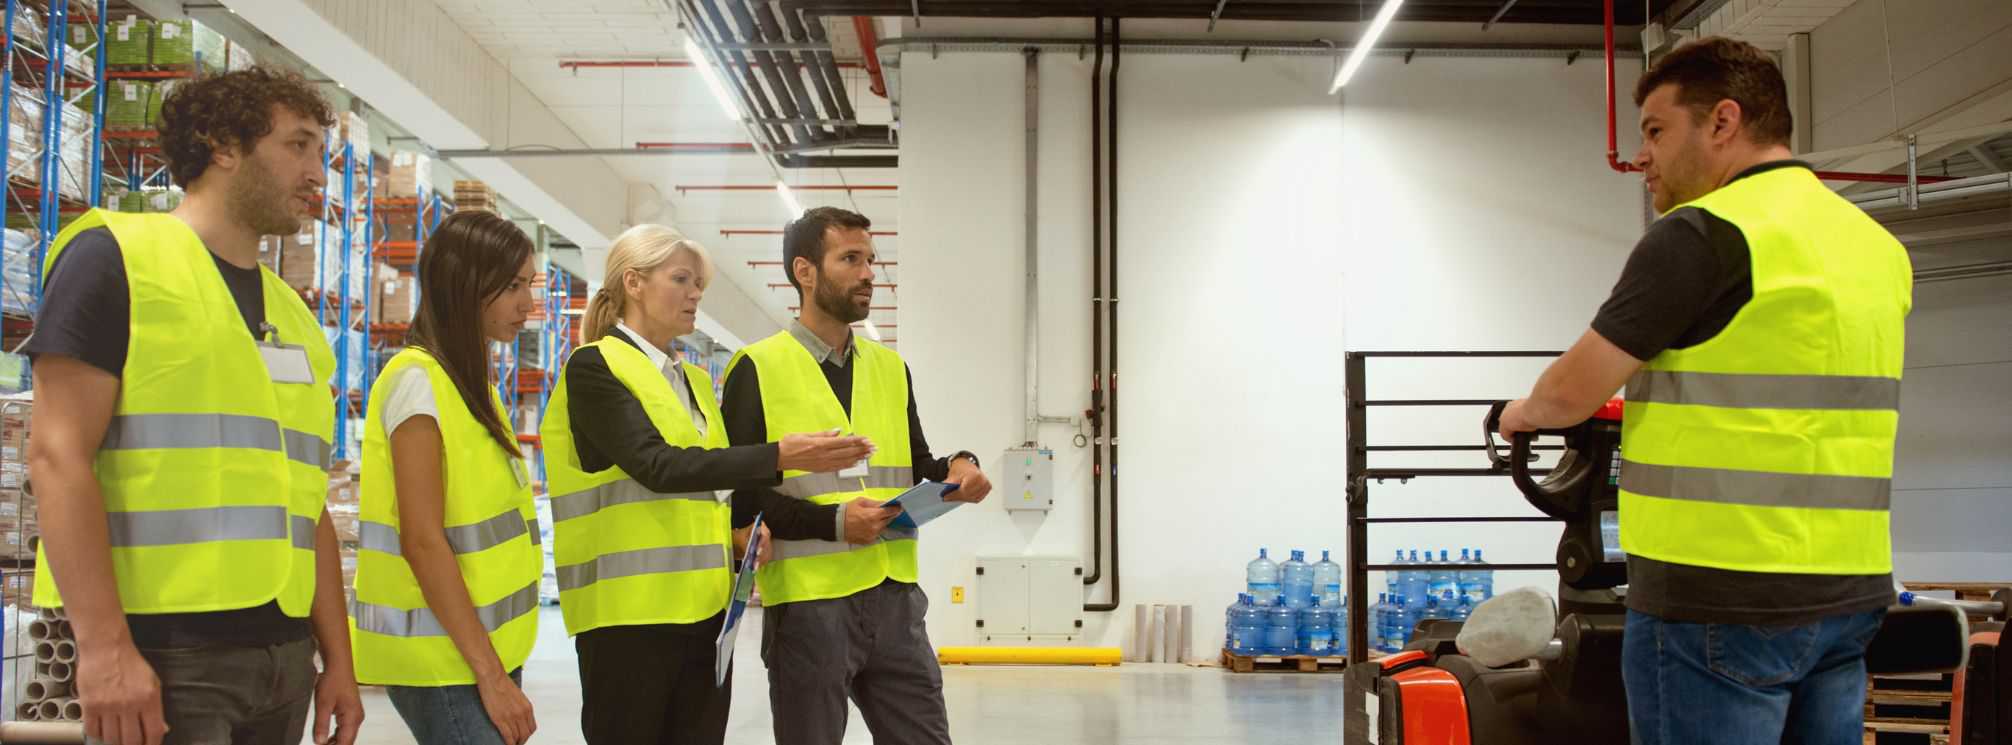 Logistics employees in safety vests watching a safety demonstration for warehouse equipment